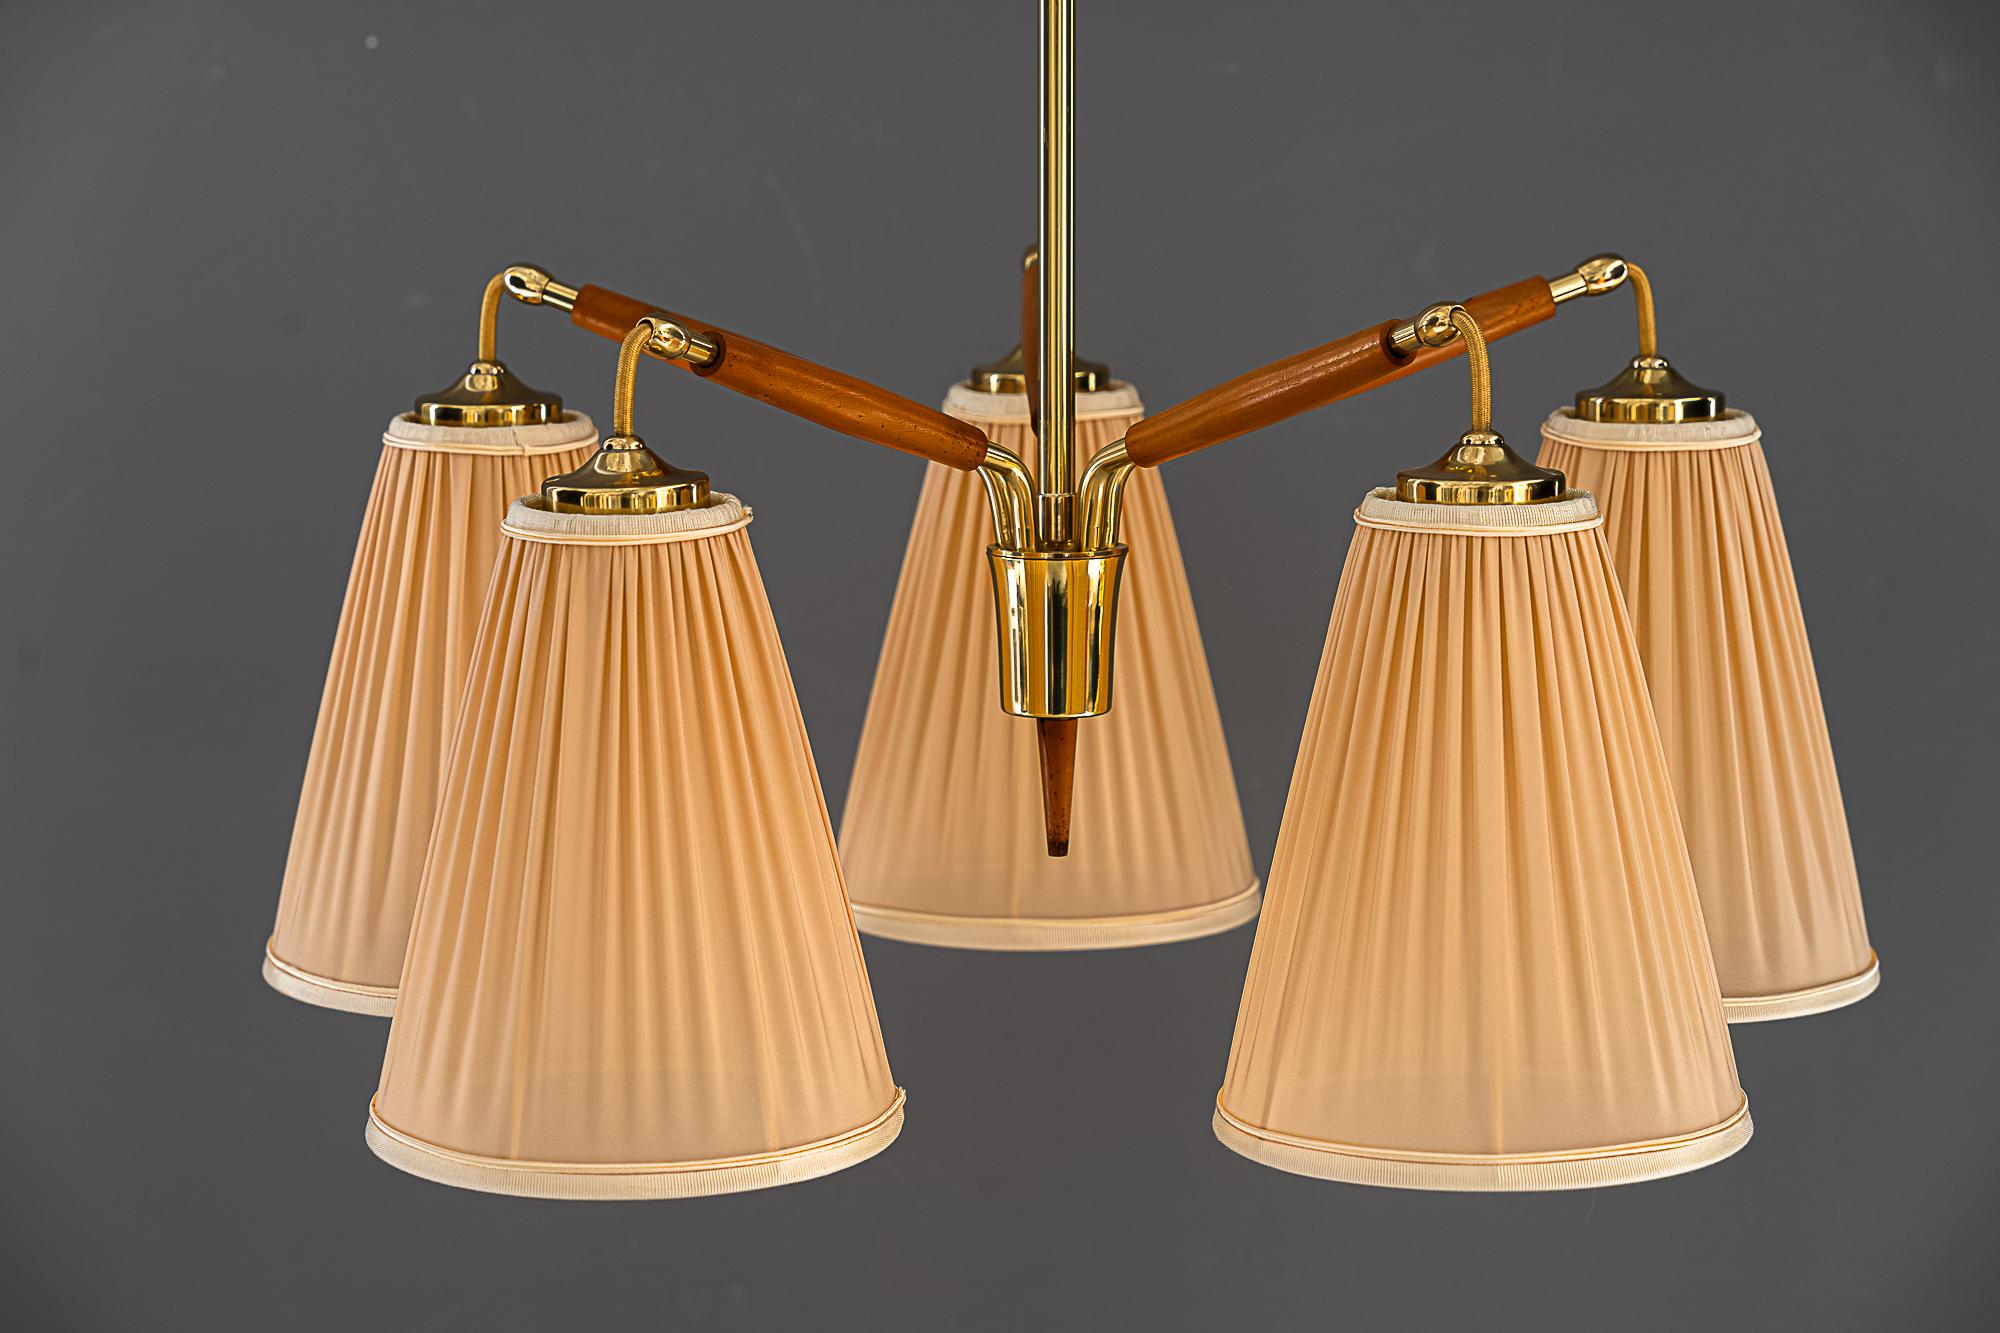 Rupert nikoll 5 Arm chandeliers vienna around 1950s
brass and wood 
The shades are replaced ( new )